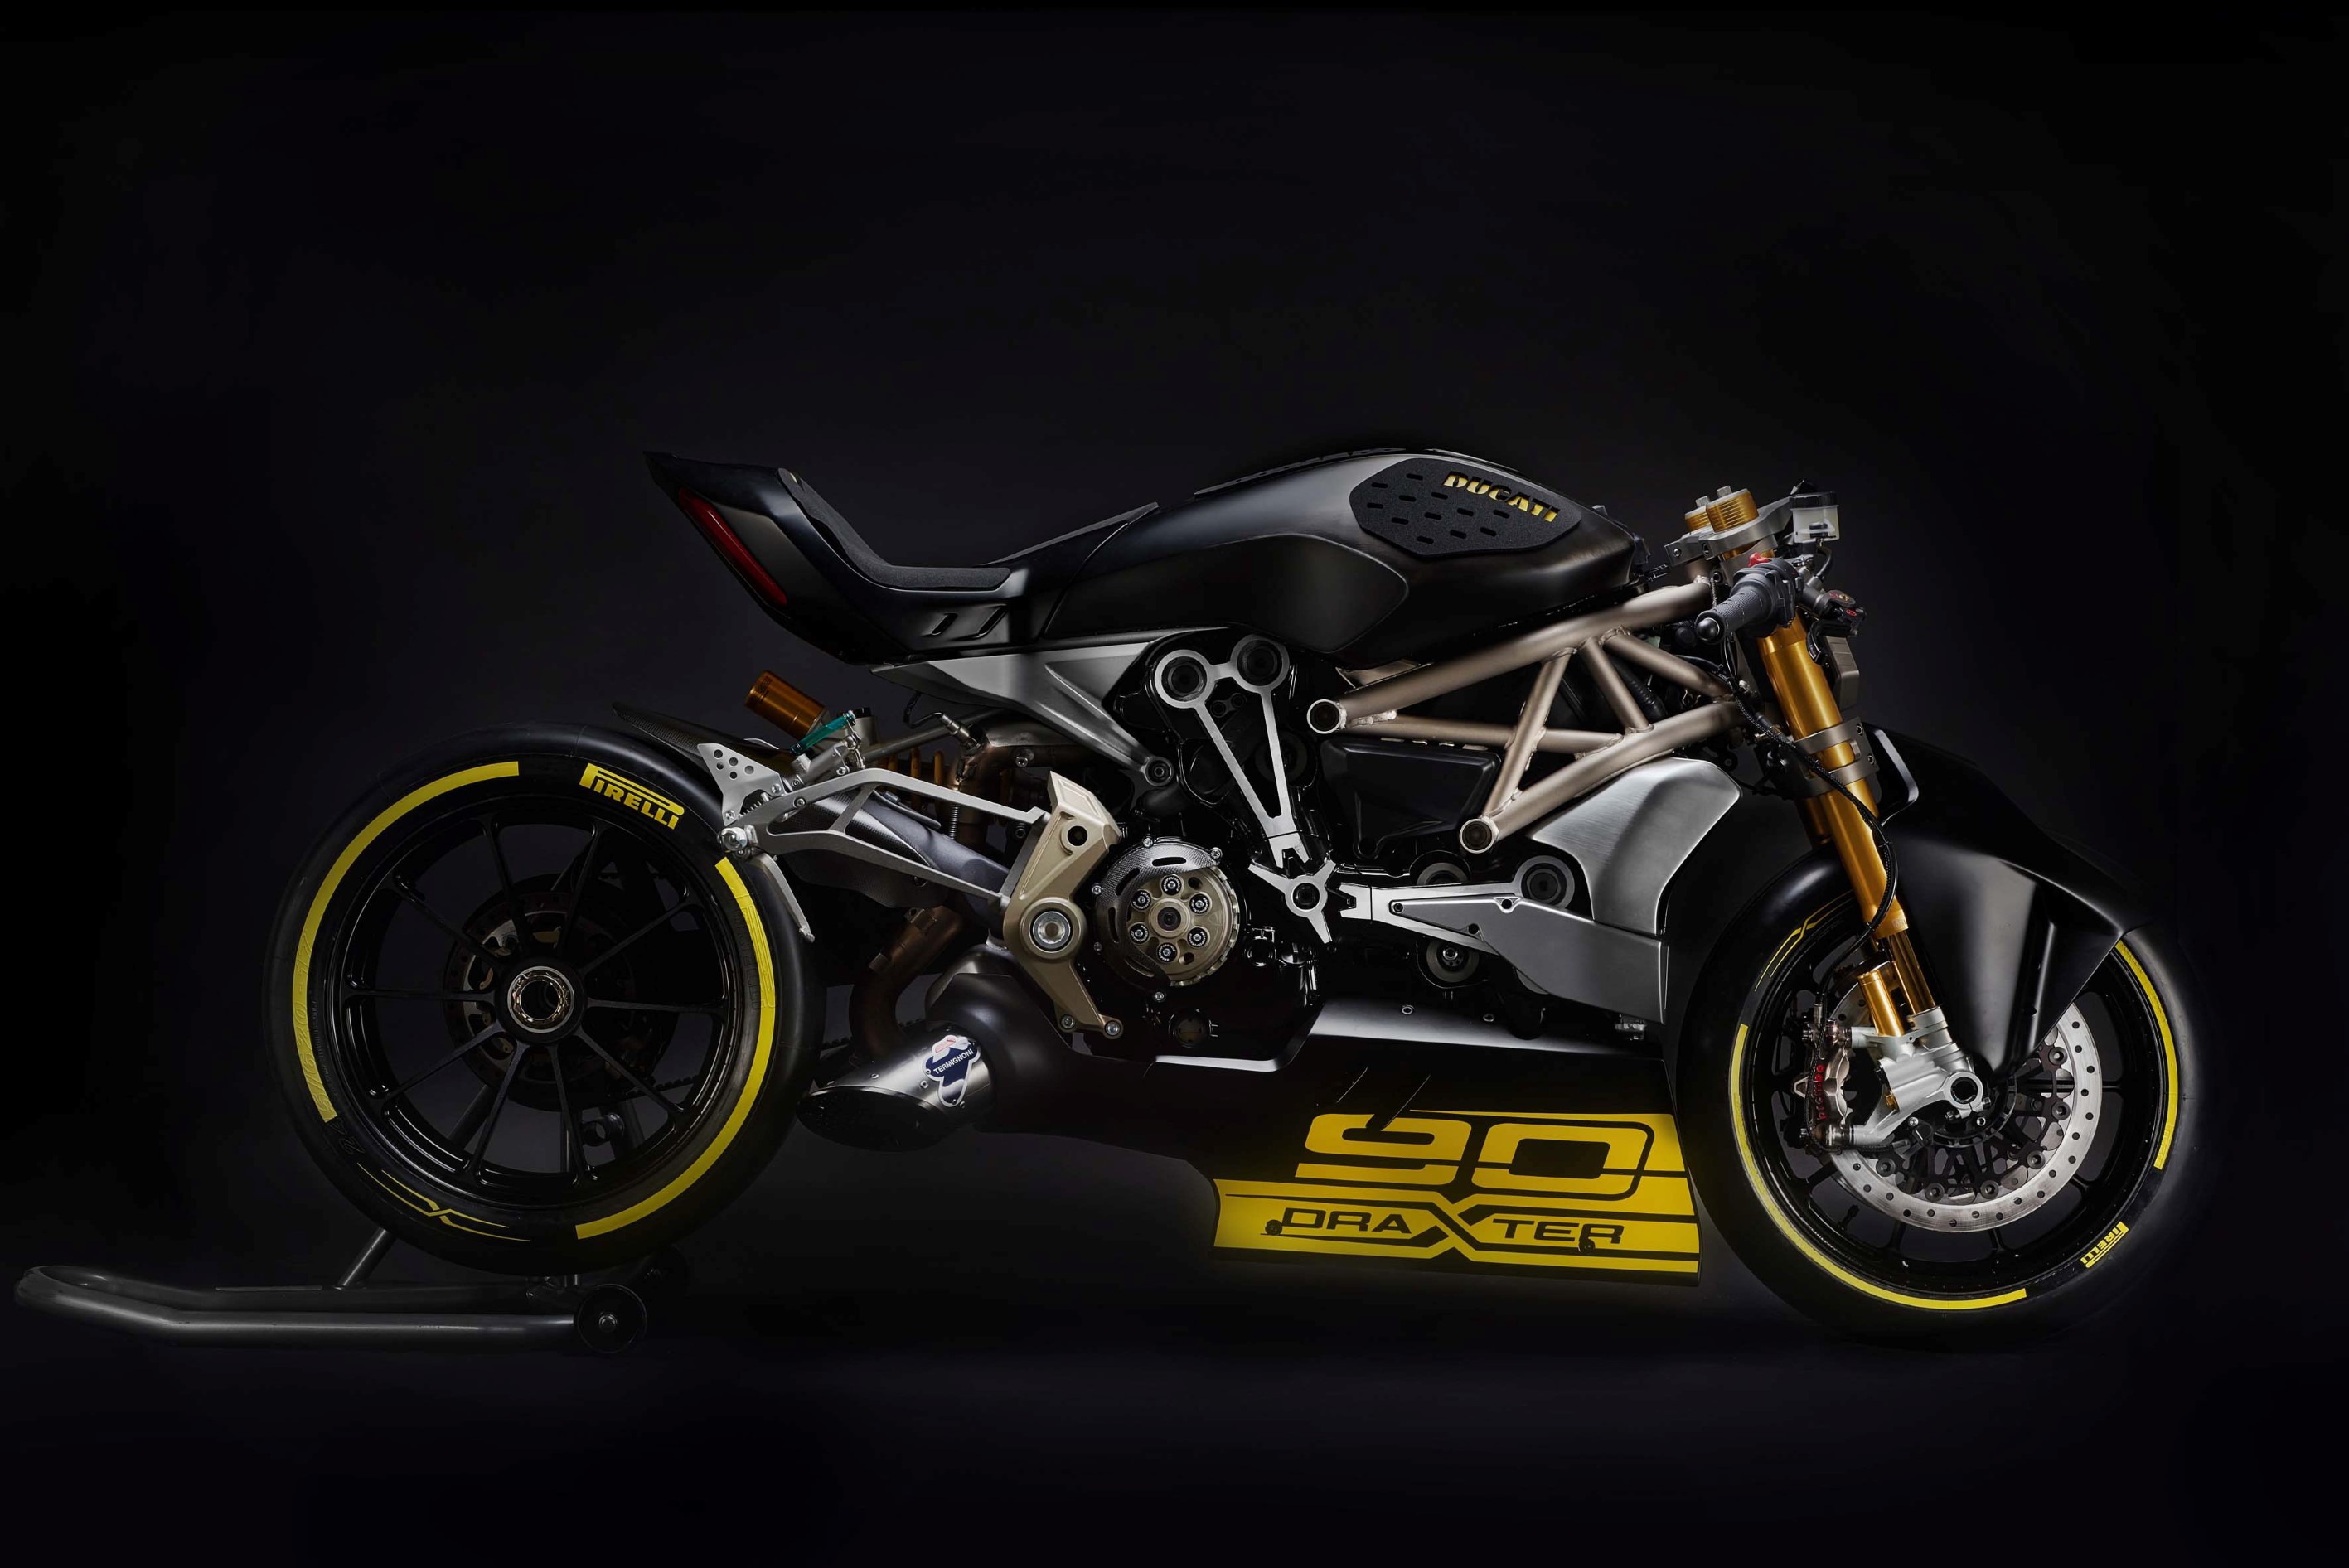 Ducati XDiavel draXter Concept